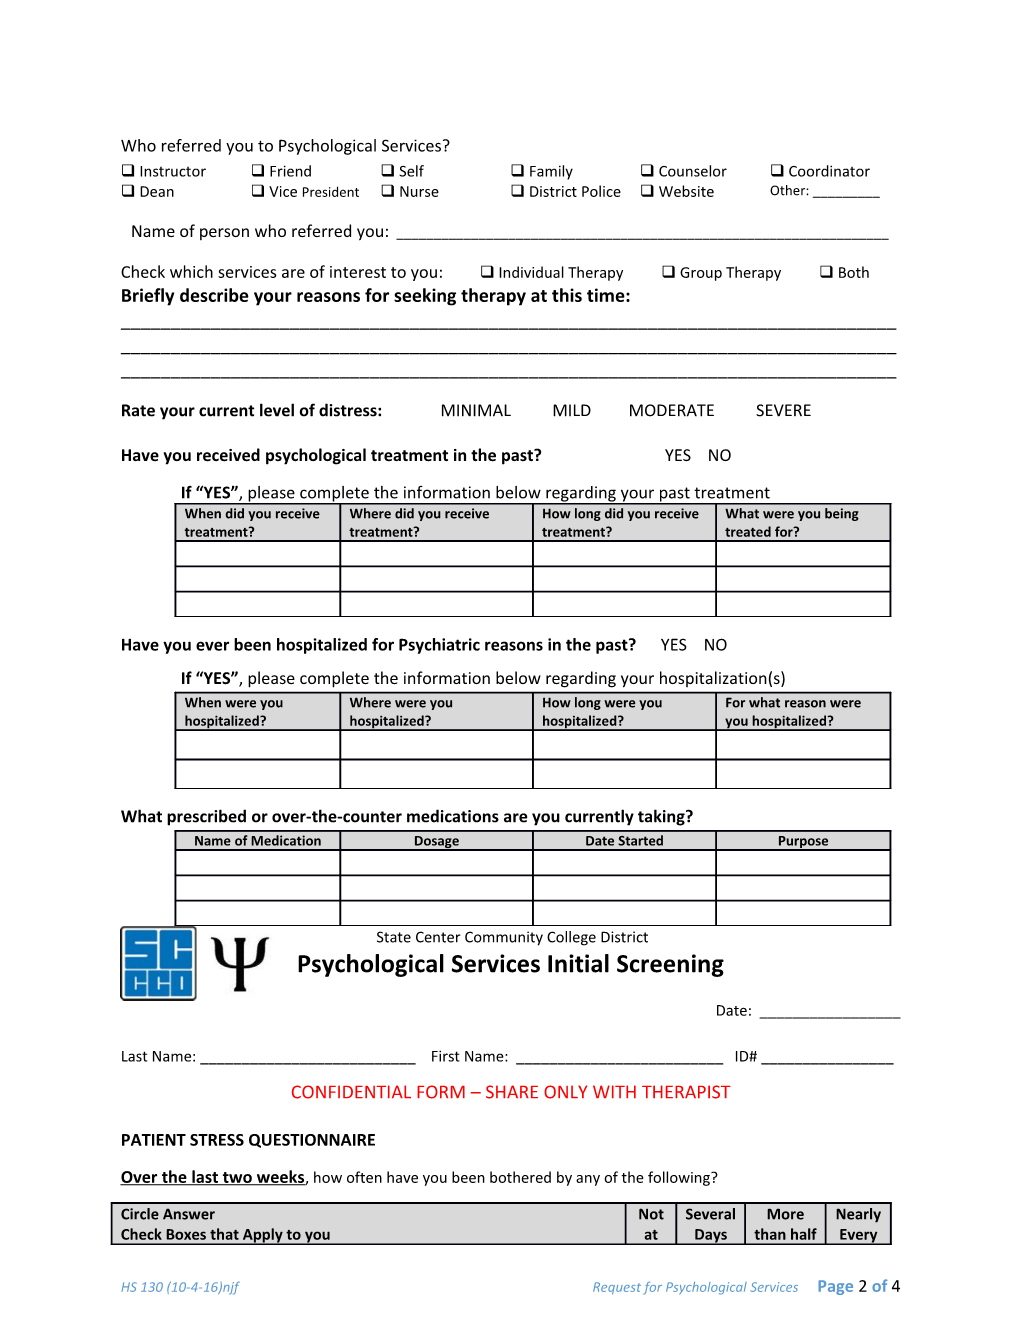 Request for Psychological Services